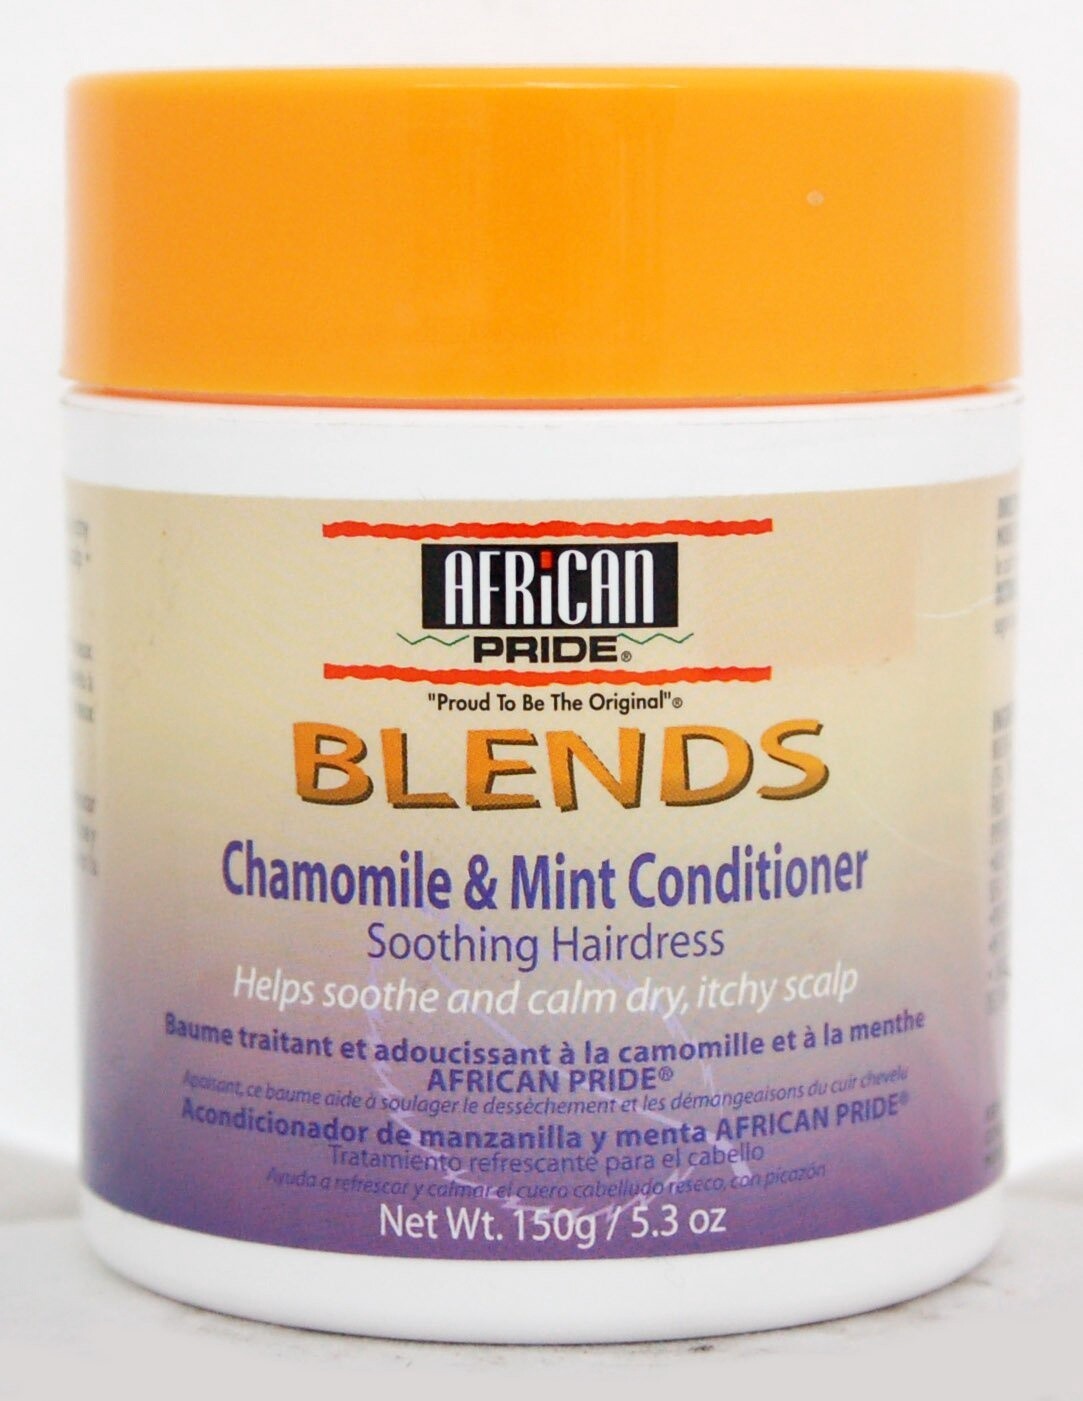 Blends Chamomile & Mint Conditioner -  Soothing Hair Dress